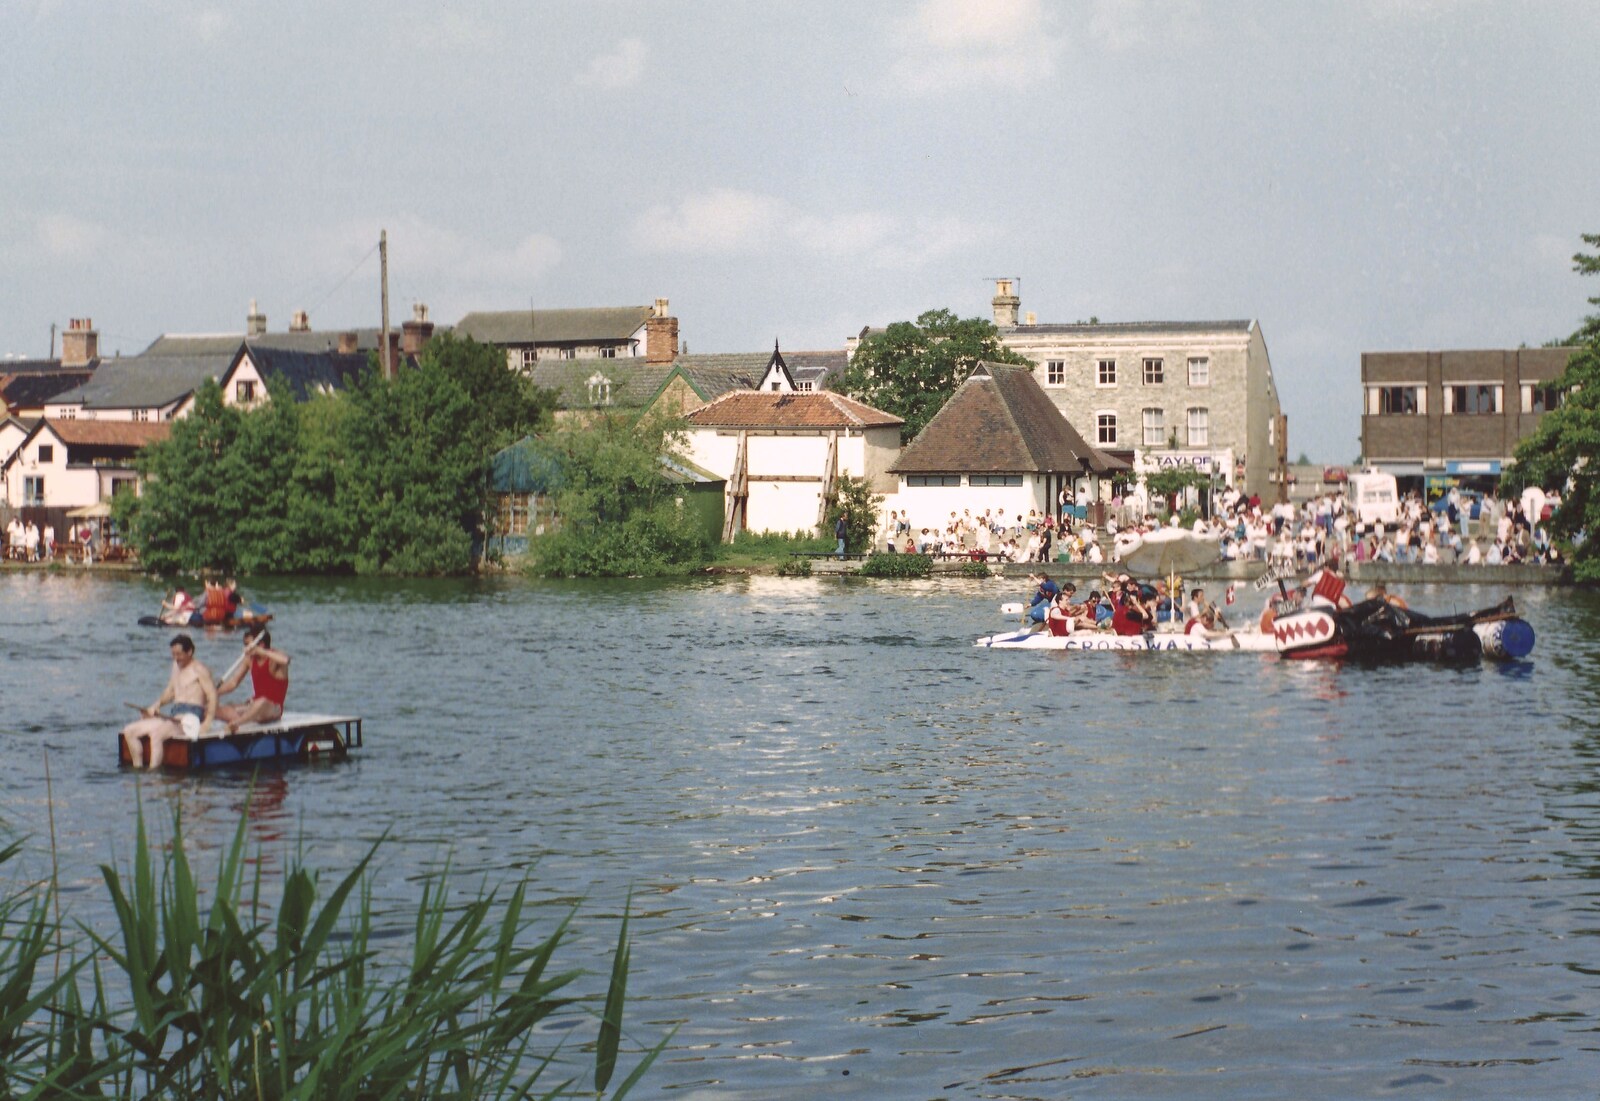 Rafts on the Mere from A Raft Race on the Mere, Diss, Norfolk - 2nd June 1990